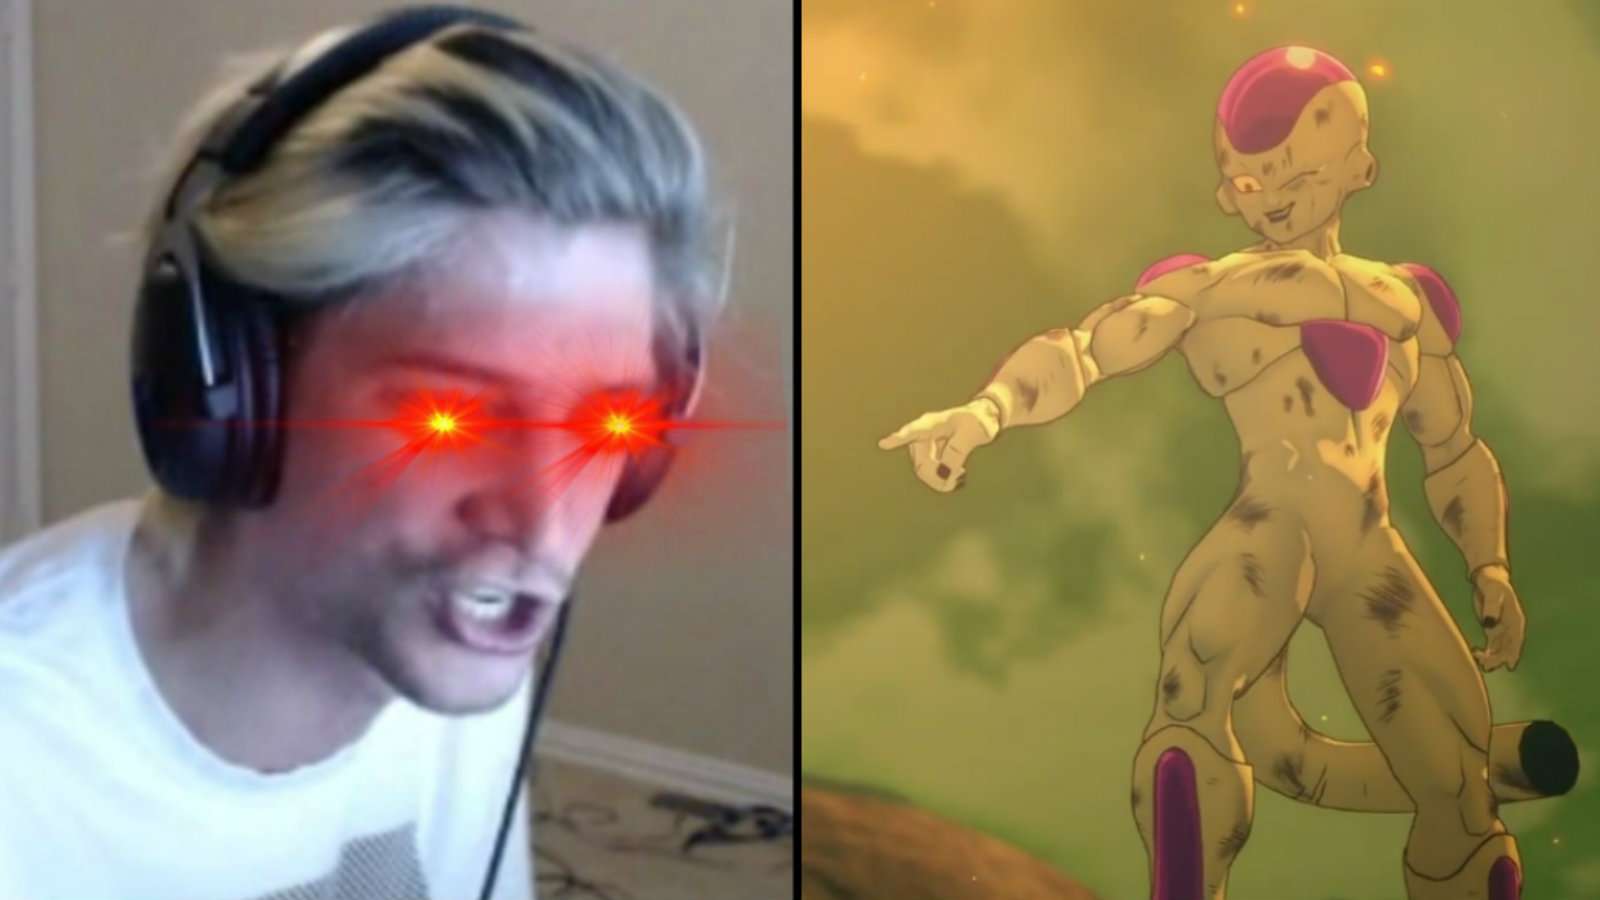 Twitch's xQc was angry after Goku's power seemed to cause his game to crash